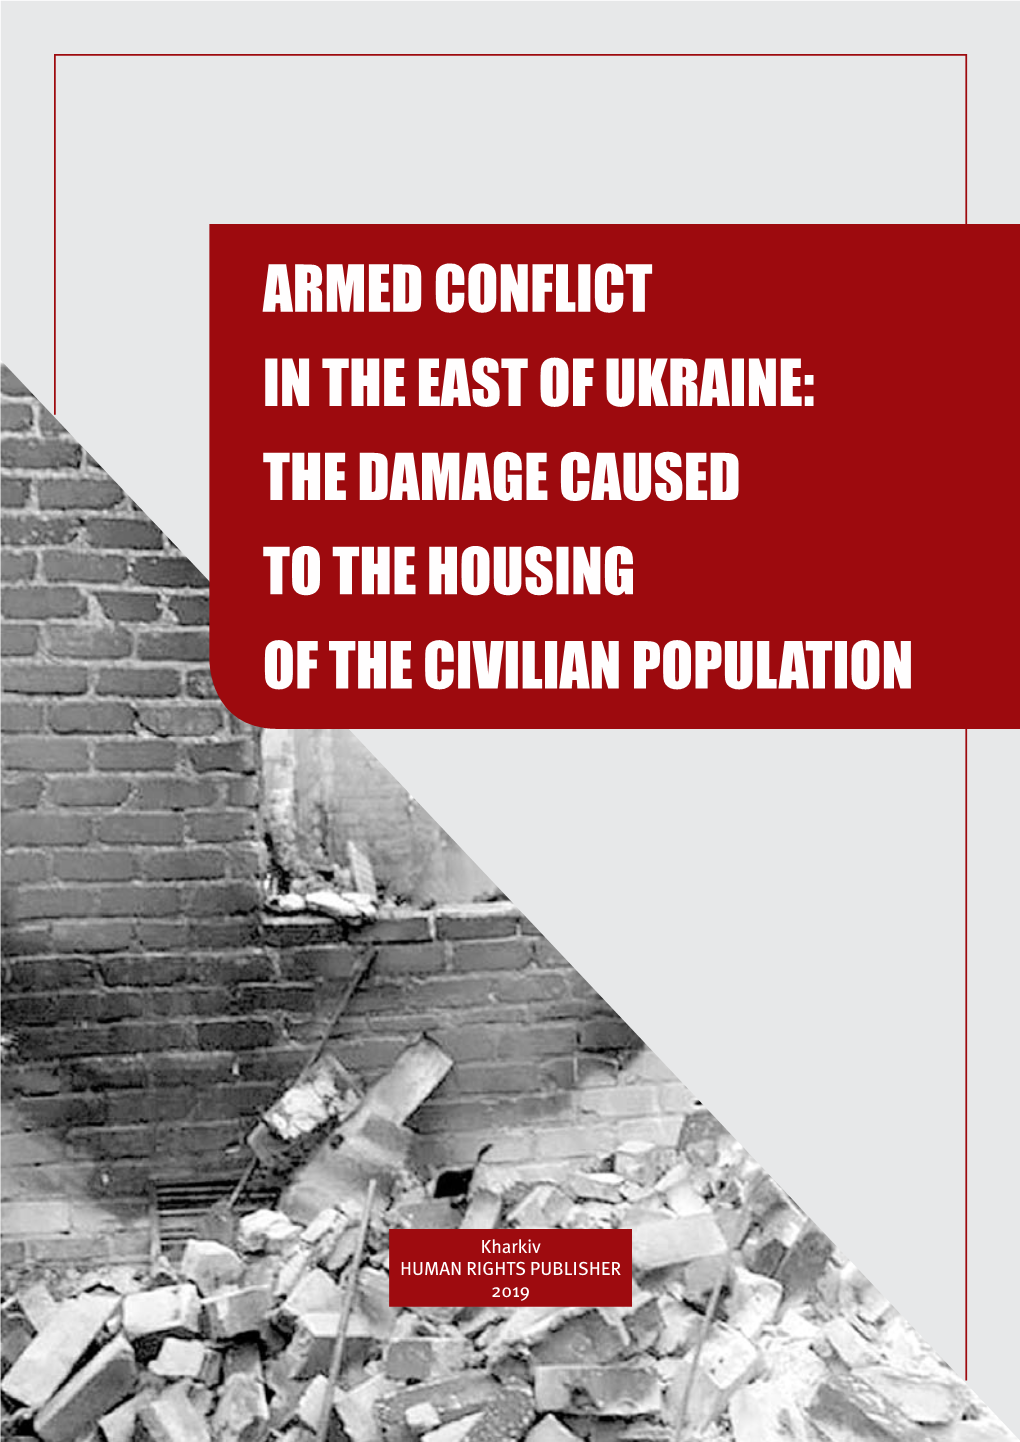 Armed Conflict in the East of Ukraine: the Damage Caused to the Housing of the Civilian Population